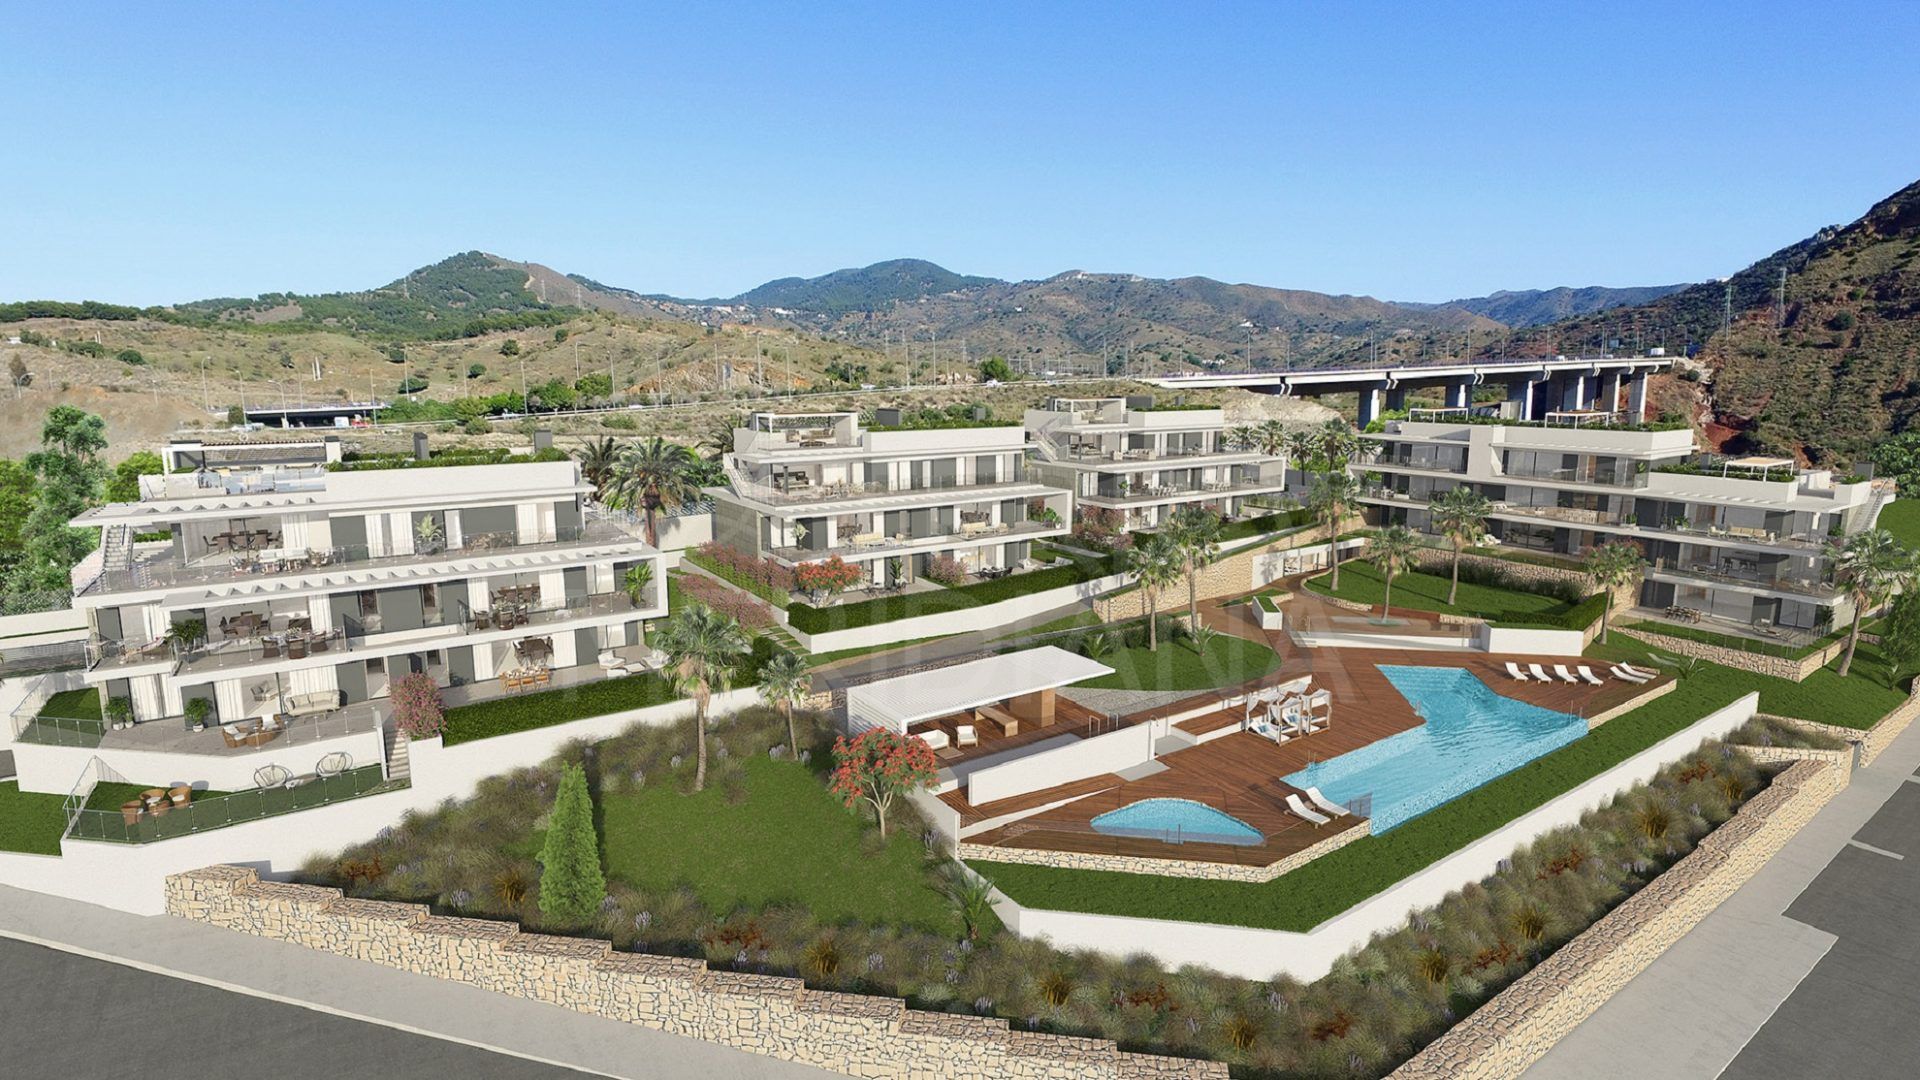 Metrovacesa Citrea, Malaga - Magnificent community near Malaga center of 25 contemporary style apartments with 2 to 5 bedrooms